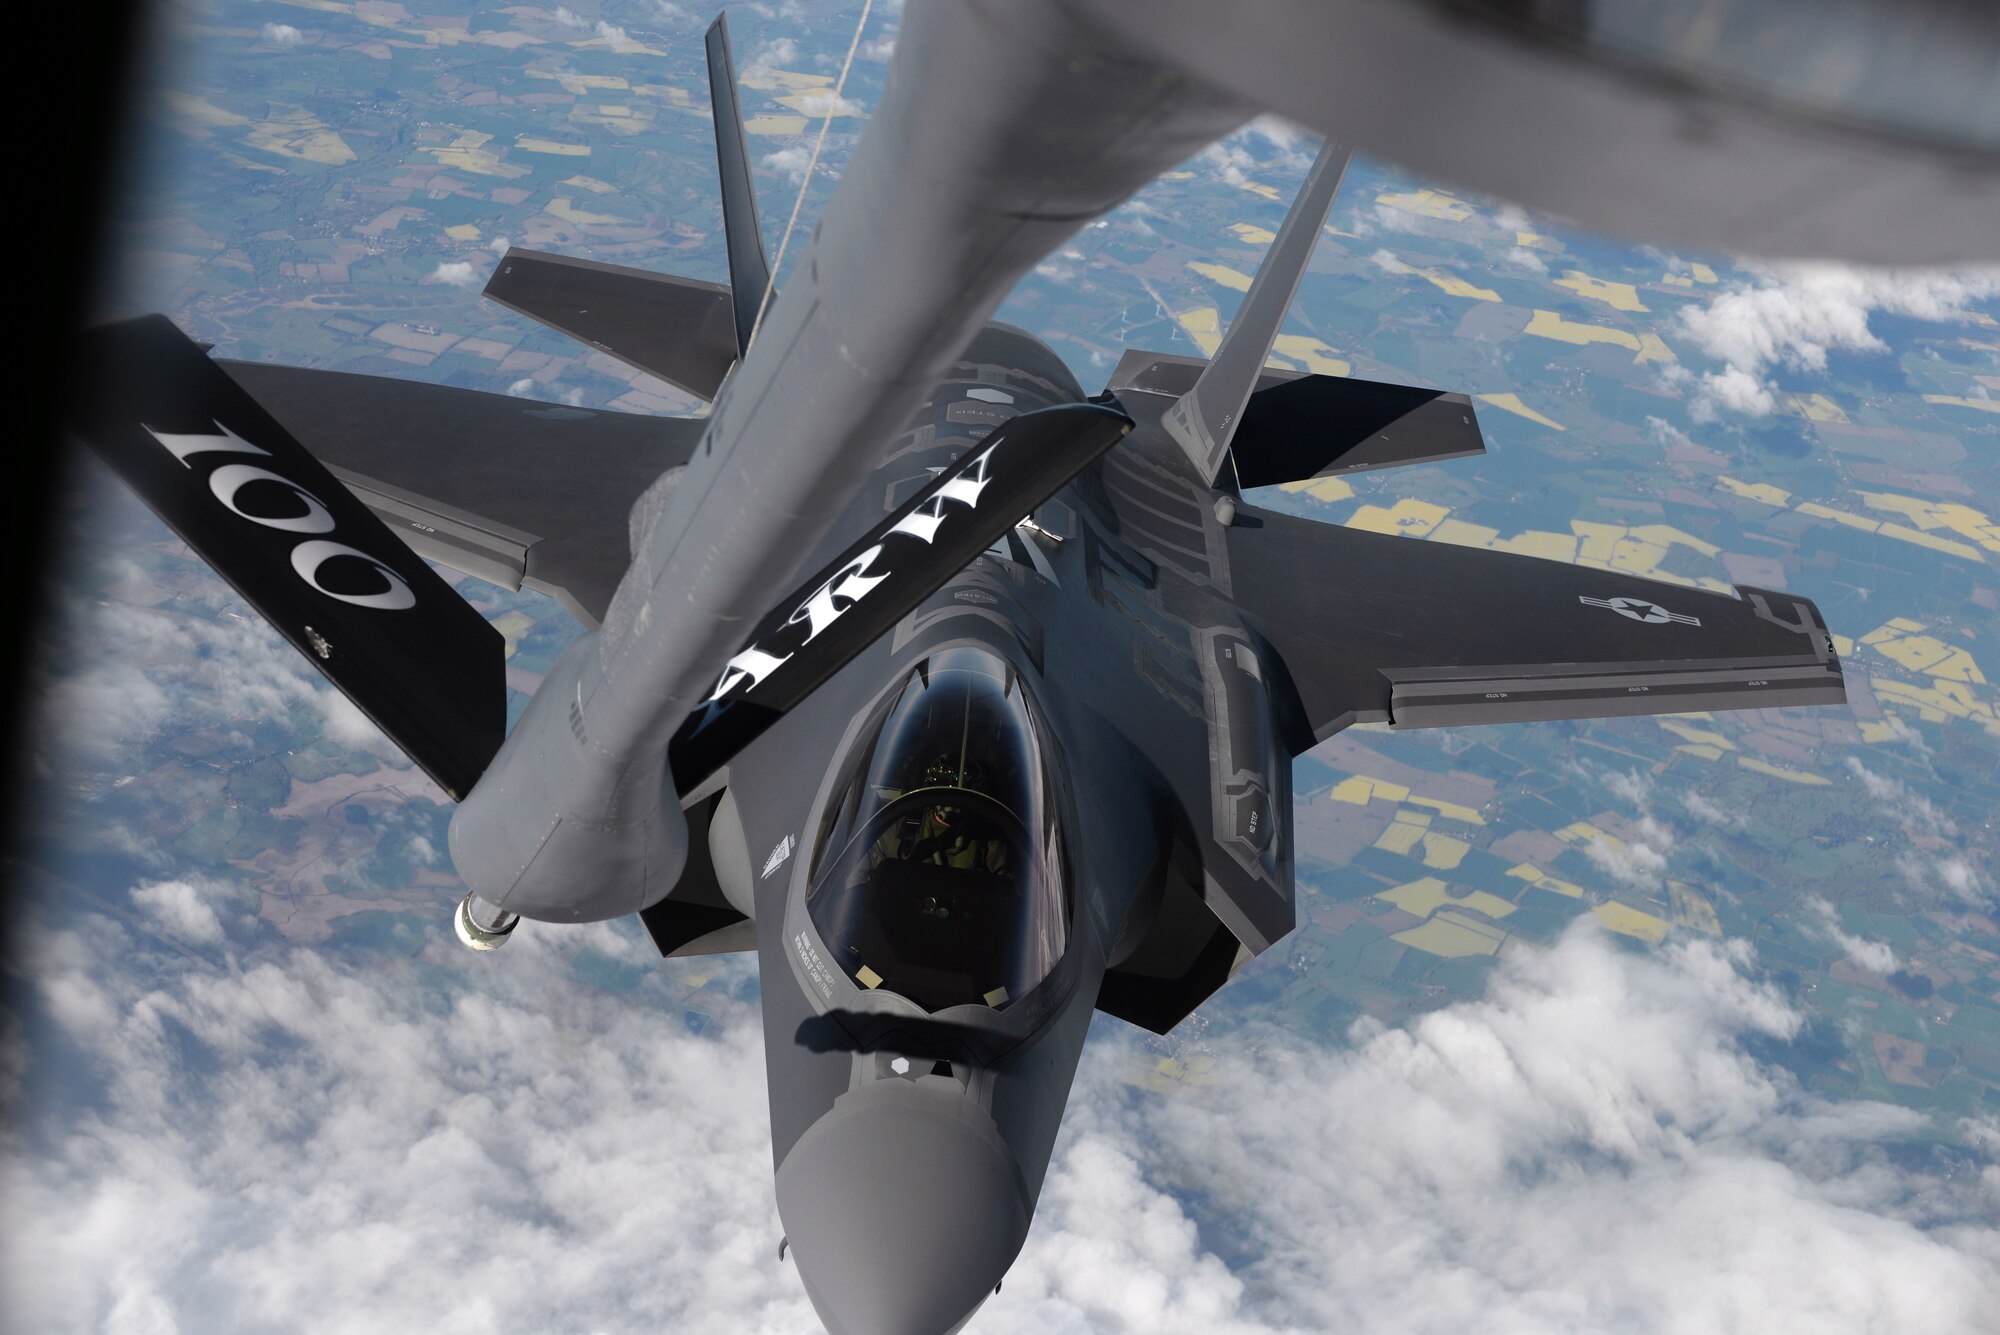 A U.S. Air Force F-35 Lightning II from Hill Air Force Base, Utah, is refueled by a 100th Air Refueling Wing KC-135 Stratotanker during a flight to Estonia on April 25, 2017. The F-35s are participating in their first-ever flying training deployment to Europe. (U.S. Air Force photo by Senior Airman Christine Groening) 
